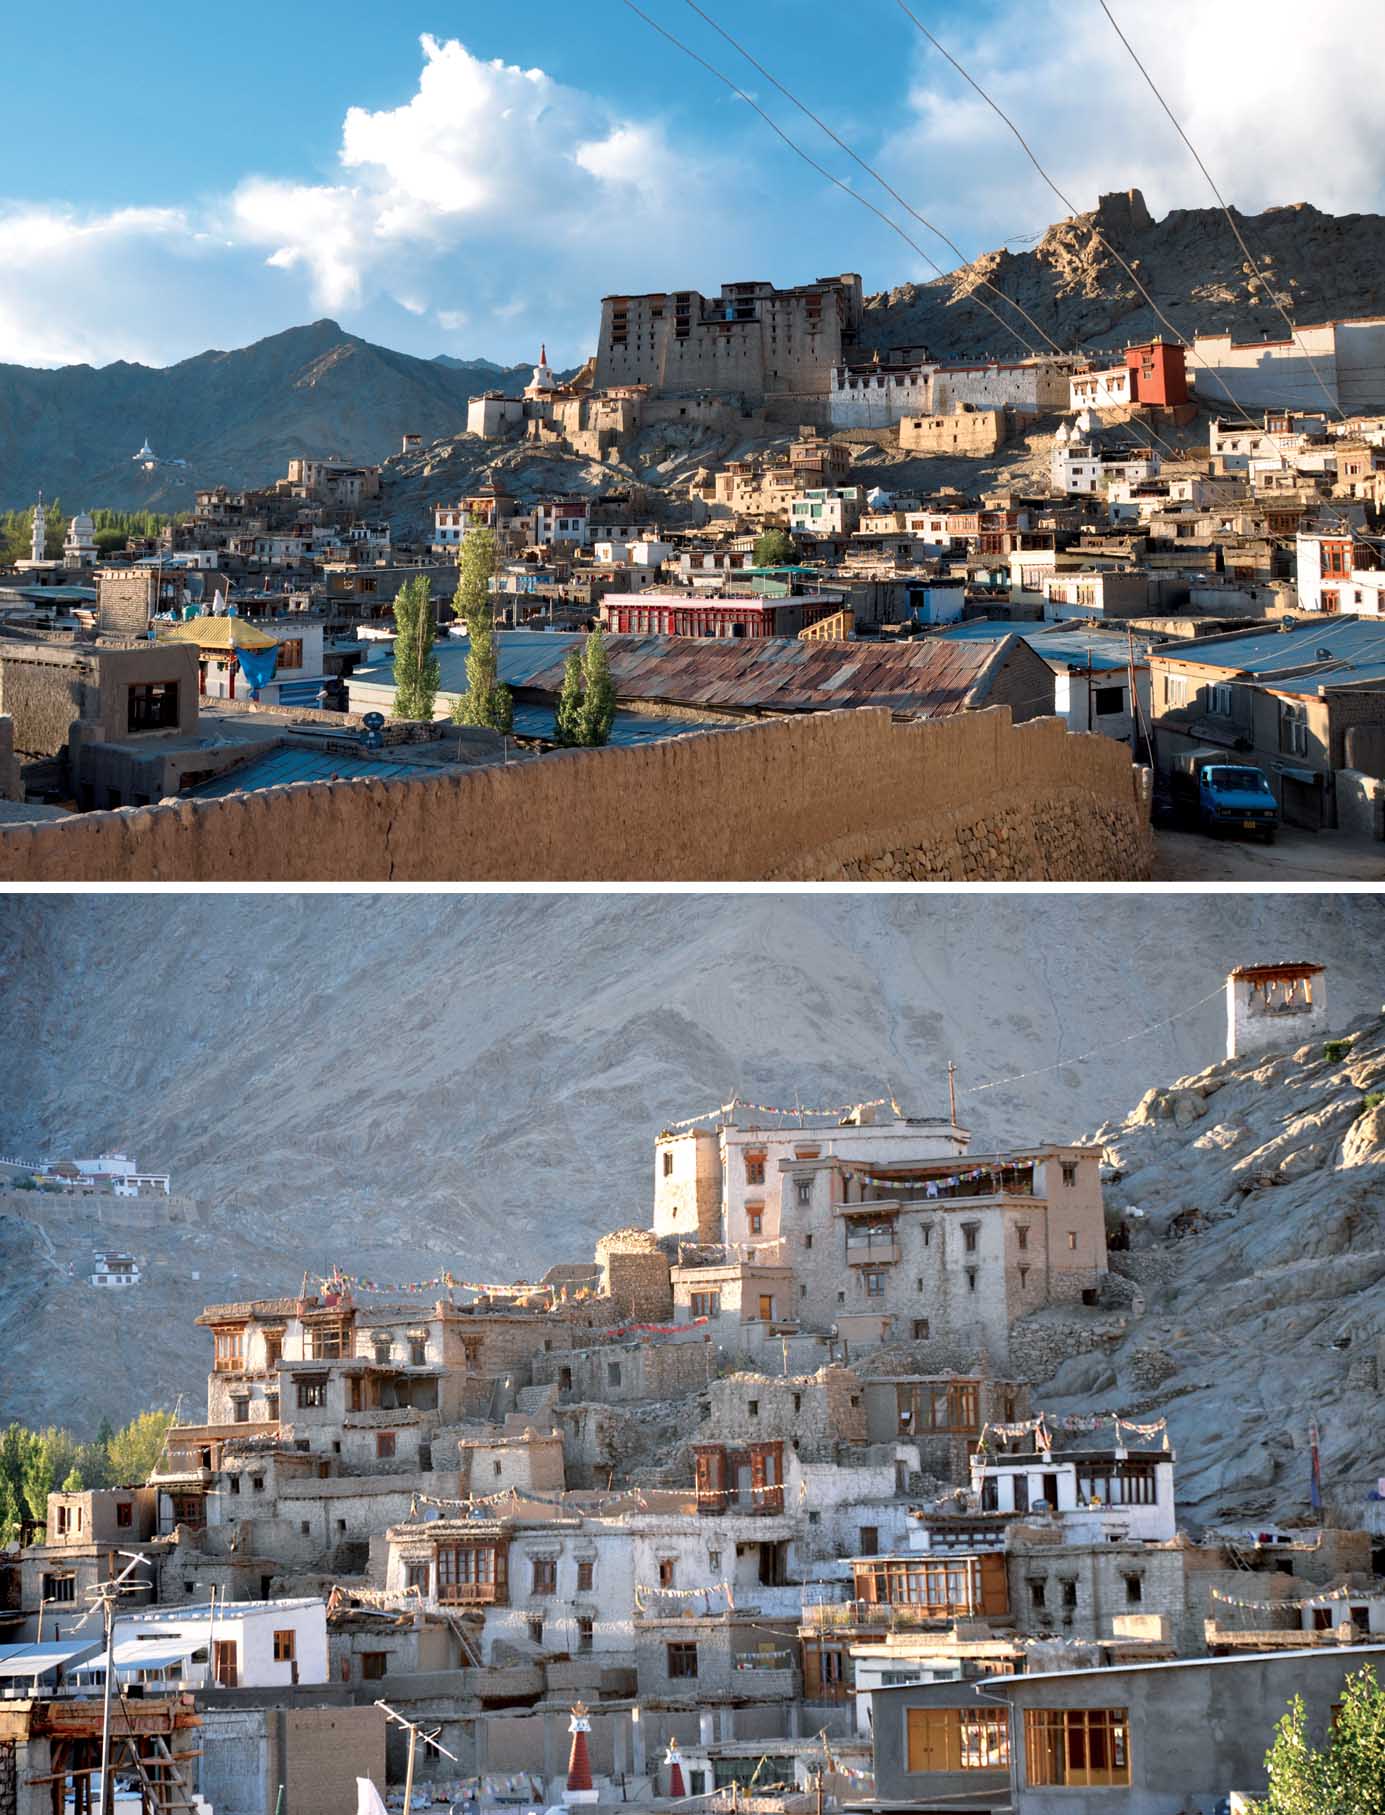 case-regeneration-through-adaptive-reuse-typical-ladakhi-landscape-old-town-leh-palace-namgyal-hill-core-stupa-urbanscape-showing-exquisite-mud-architecture